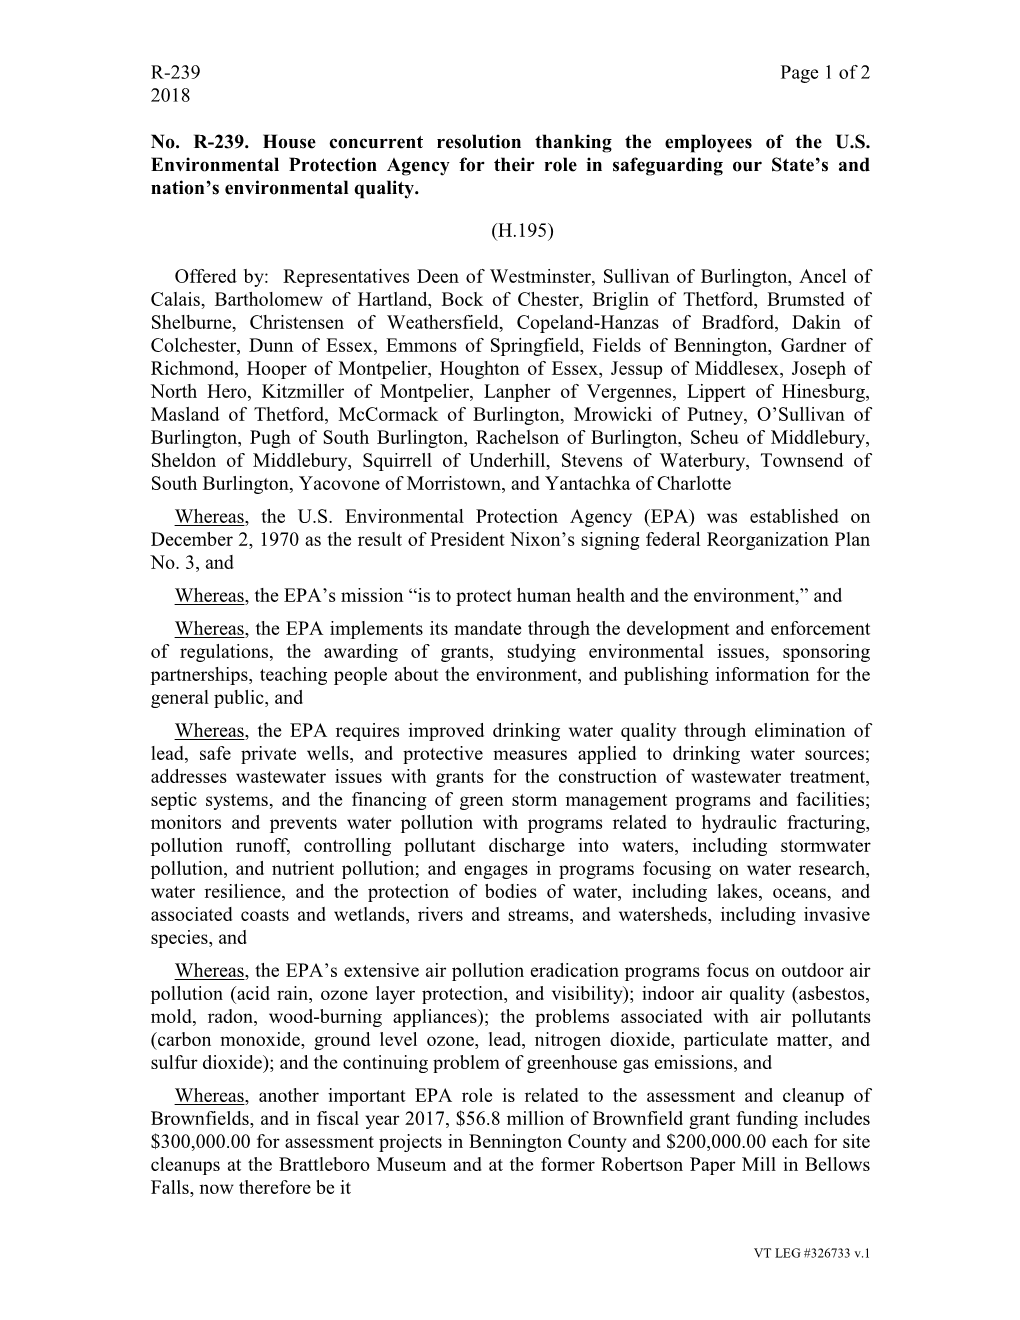 R-239 Page 1 of 2 2018 No. R-239. House Concurrent Resolution Thanking the Employees of the U.S. Environmental Protection Agency